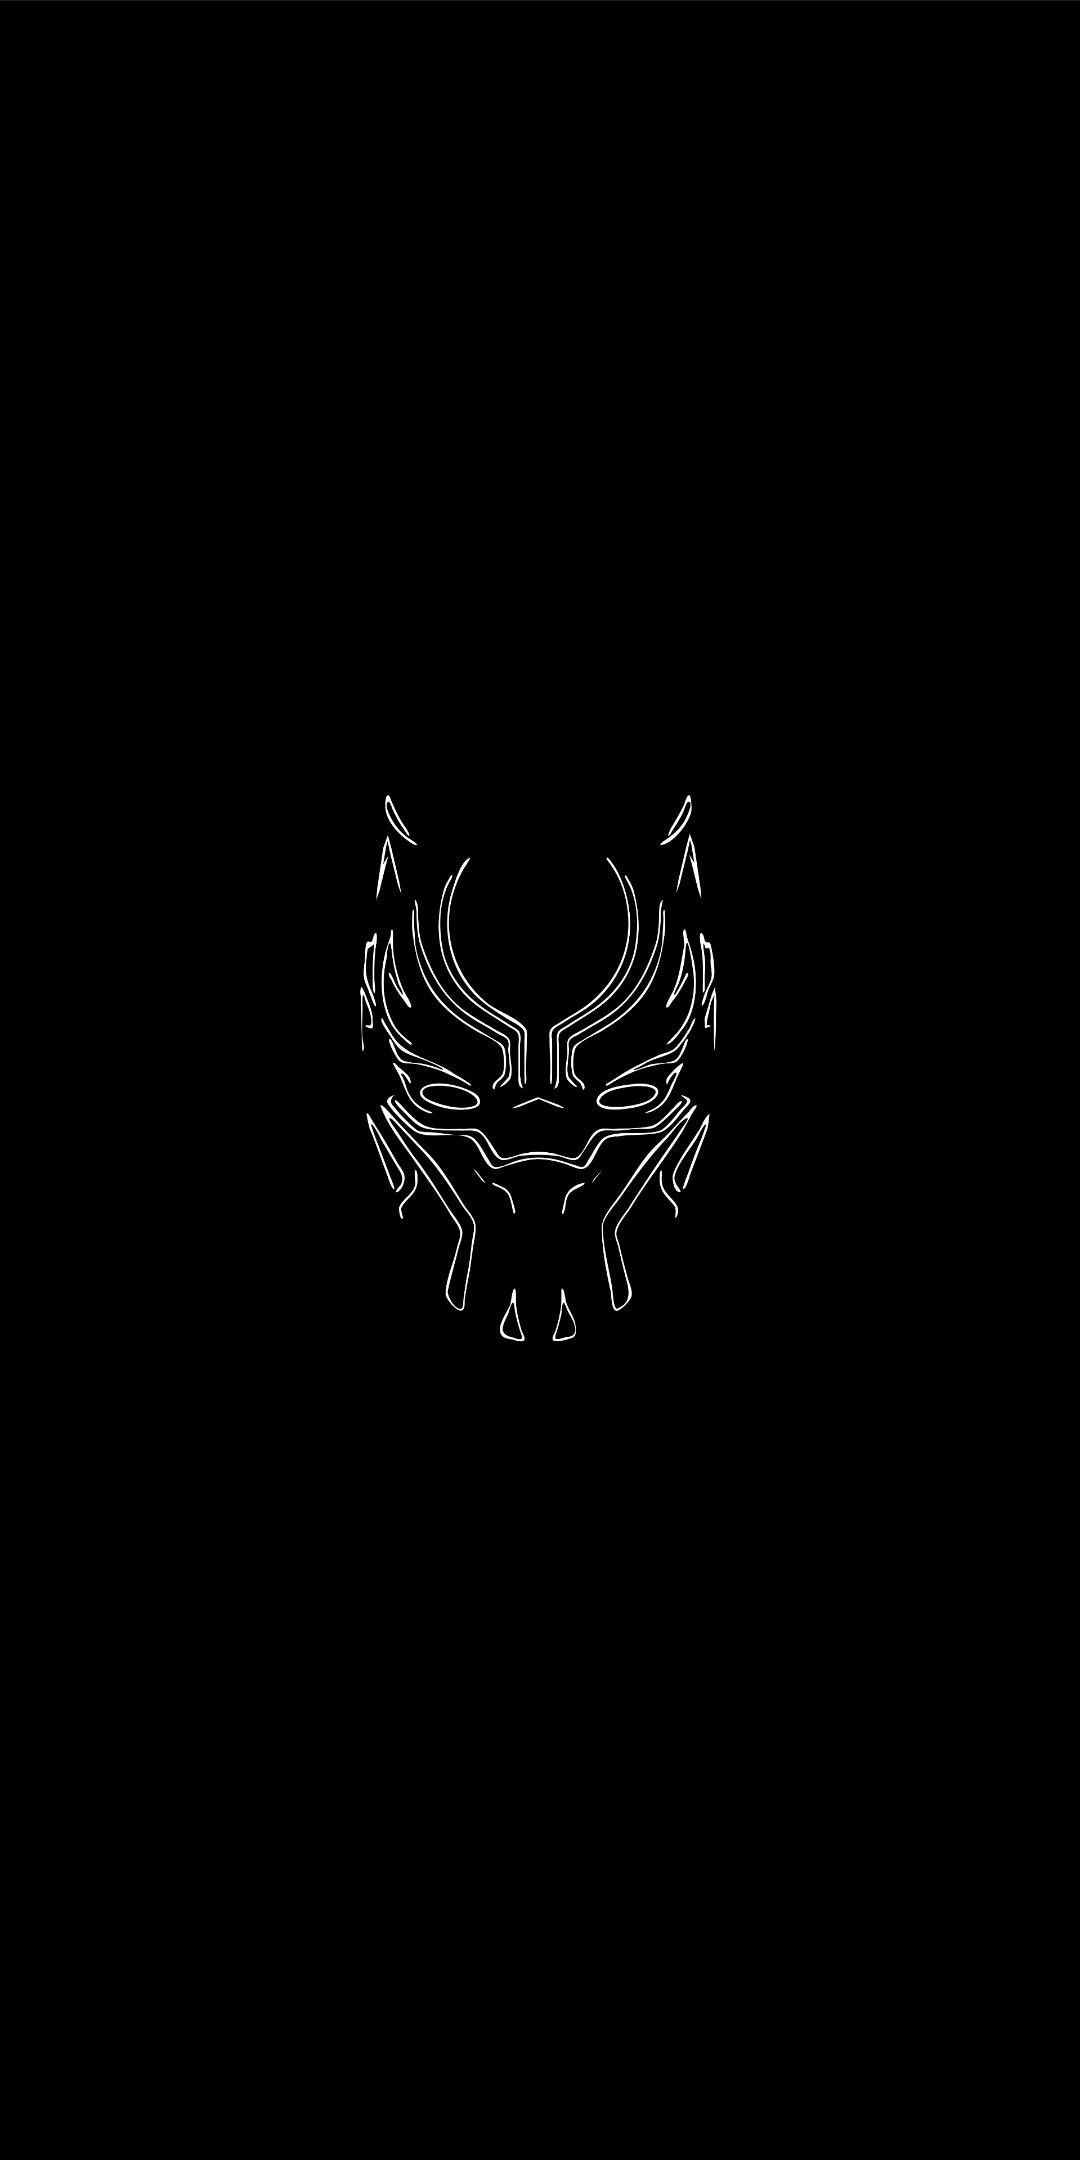 Cute Black Wallpaper iPhone iPhone background quotes. Black panther marvel, Black panther art, Android wallpaper black